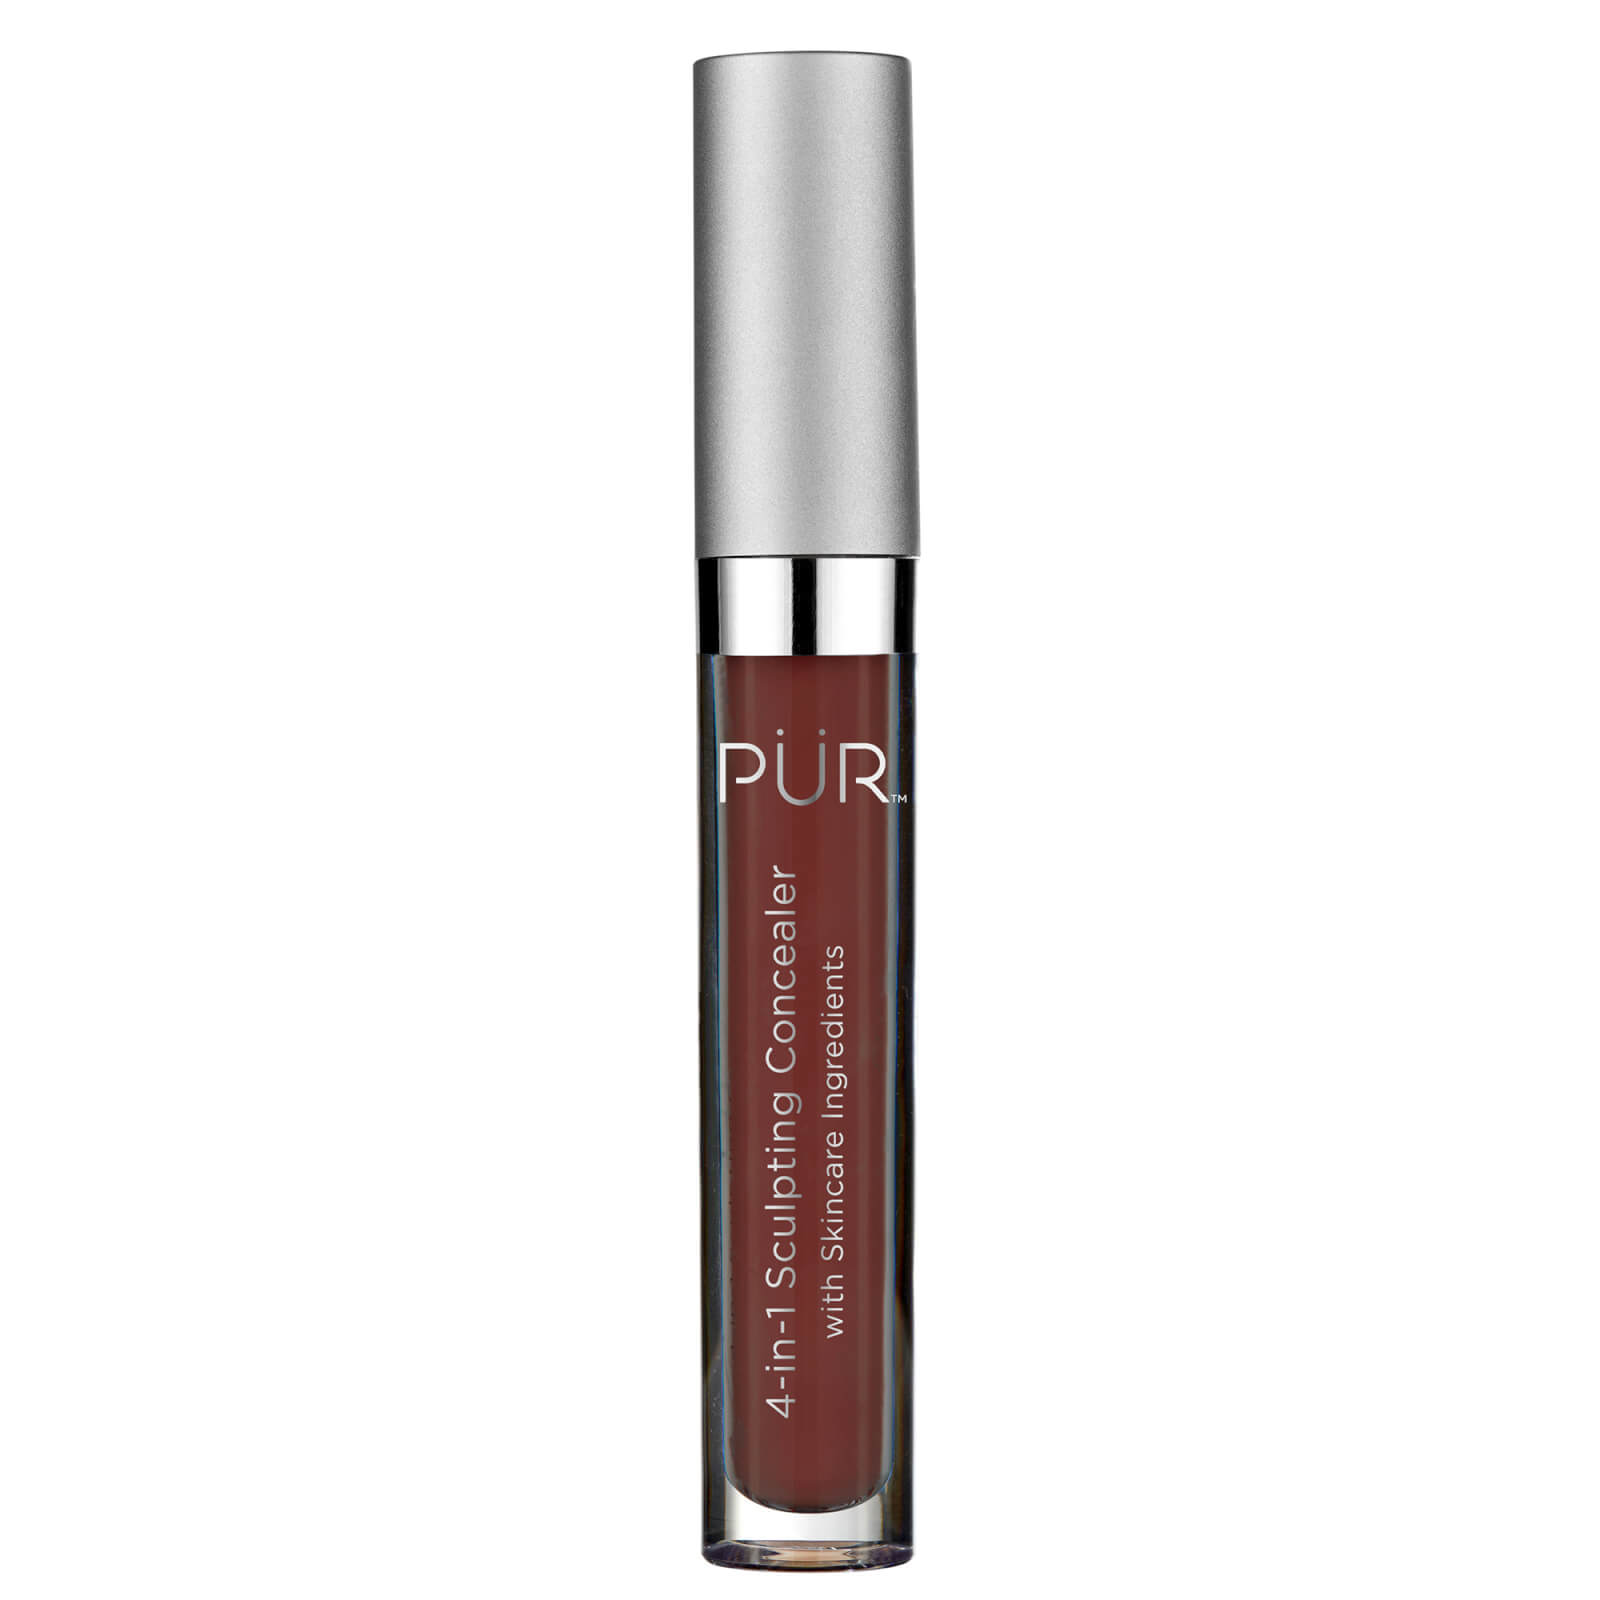 PUR 4-in-1 Sculpting Concealer with Skincare Ingredients 3.76g (Various Shades) - DPP1